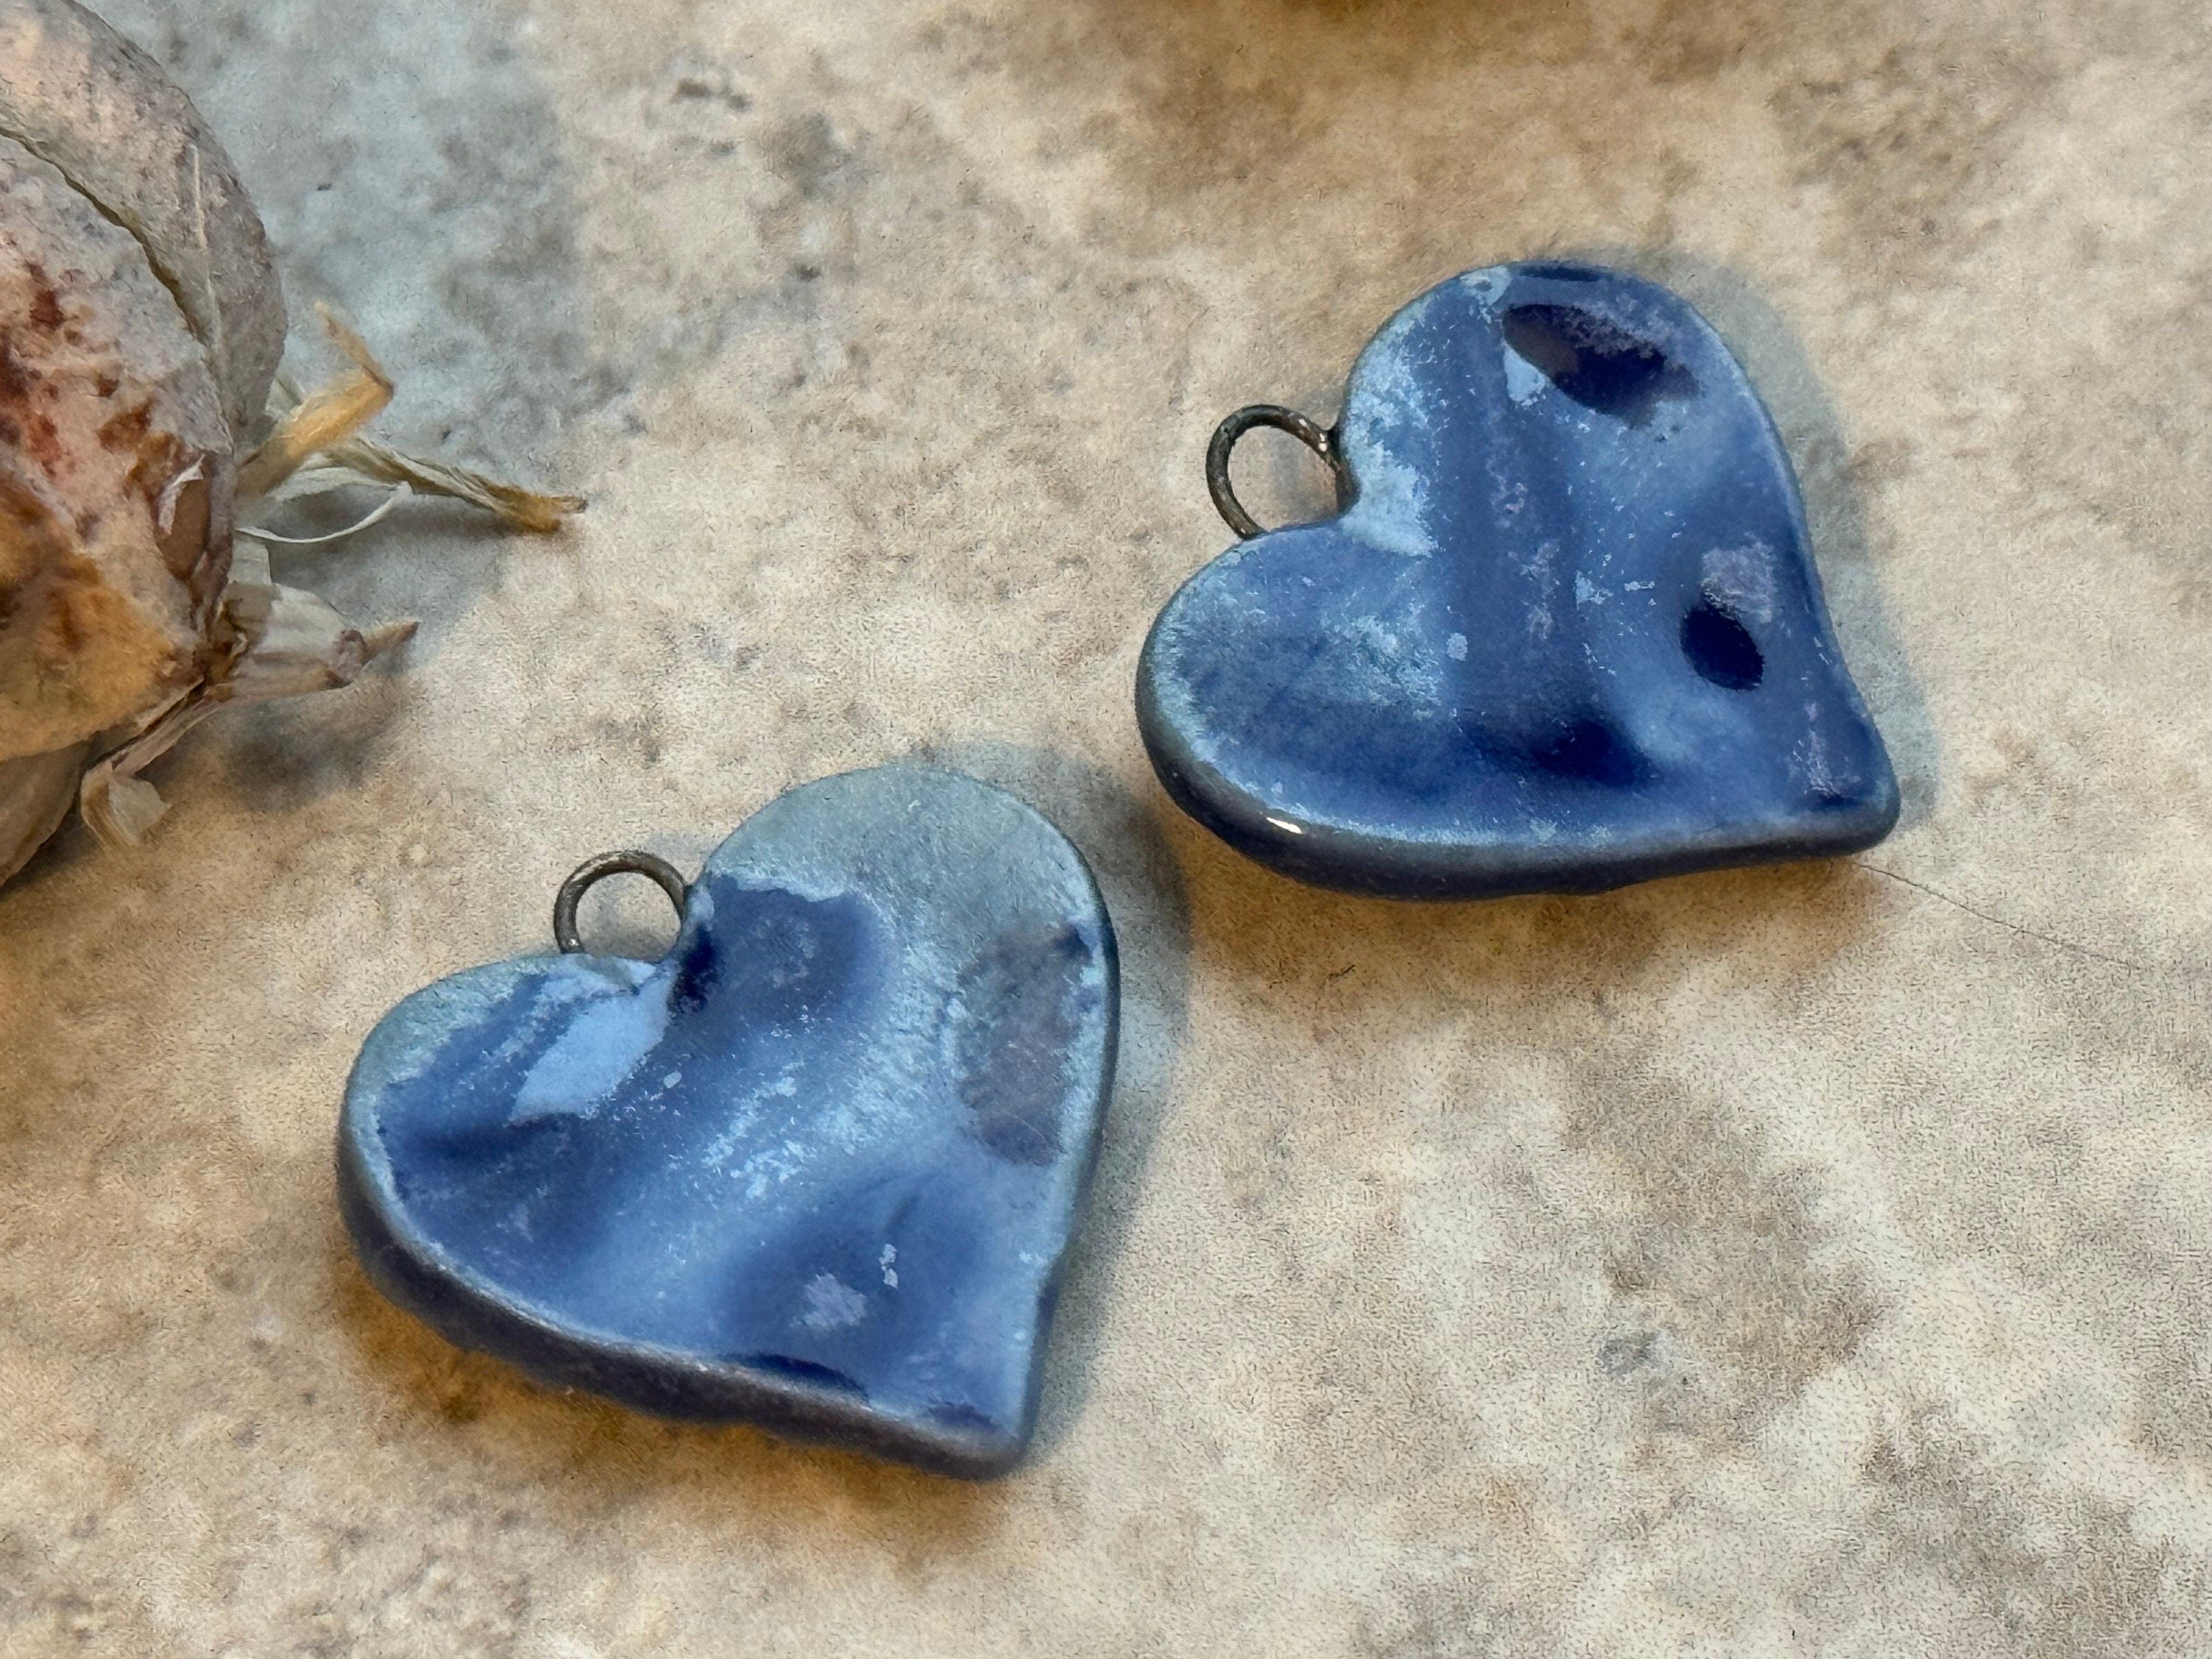 Blue Talavera Earring Bead Pair, Hearts, Vintage Pattern, Porcelain Ceramic Charms, Jewelry Making Components, Beading Handmade